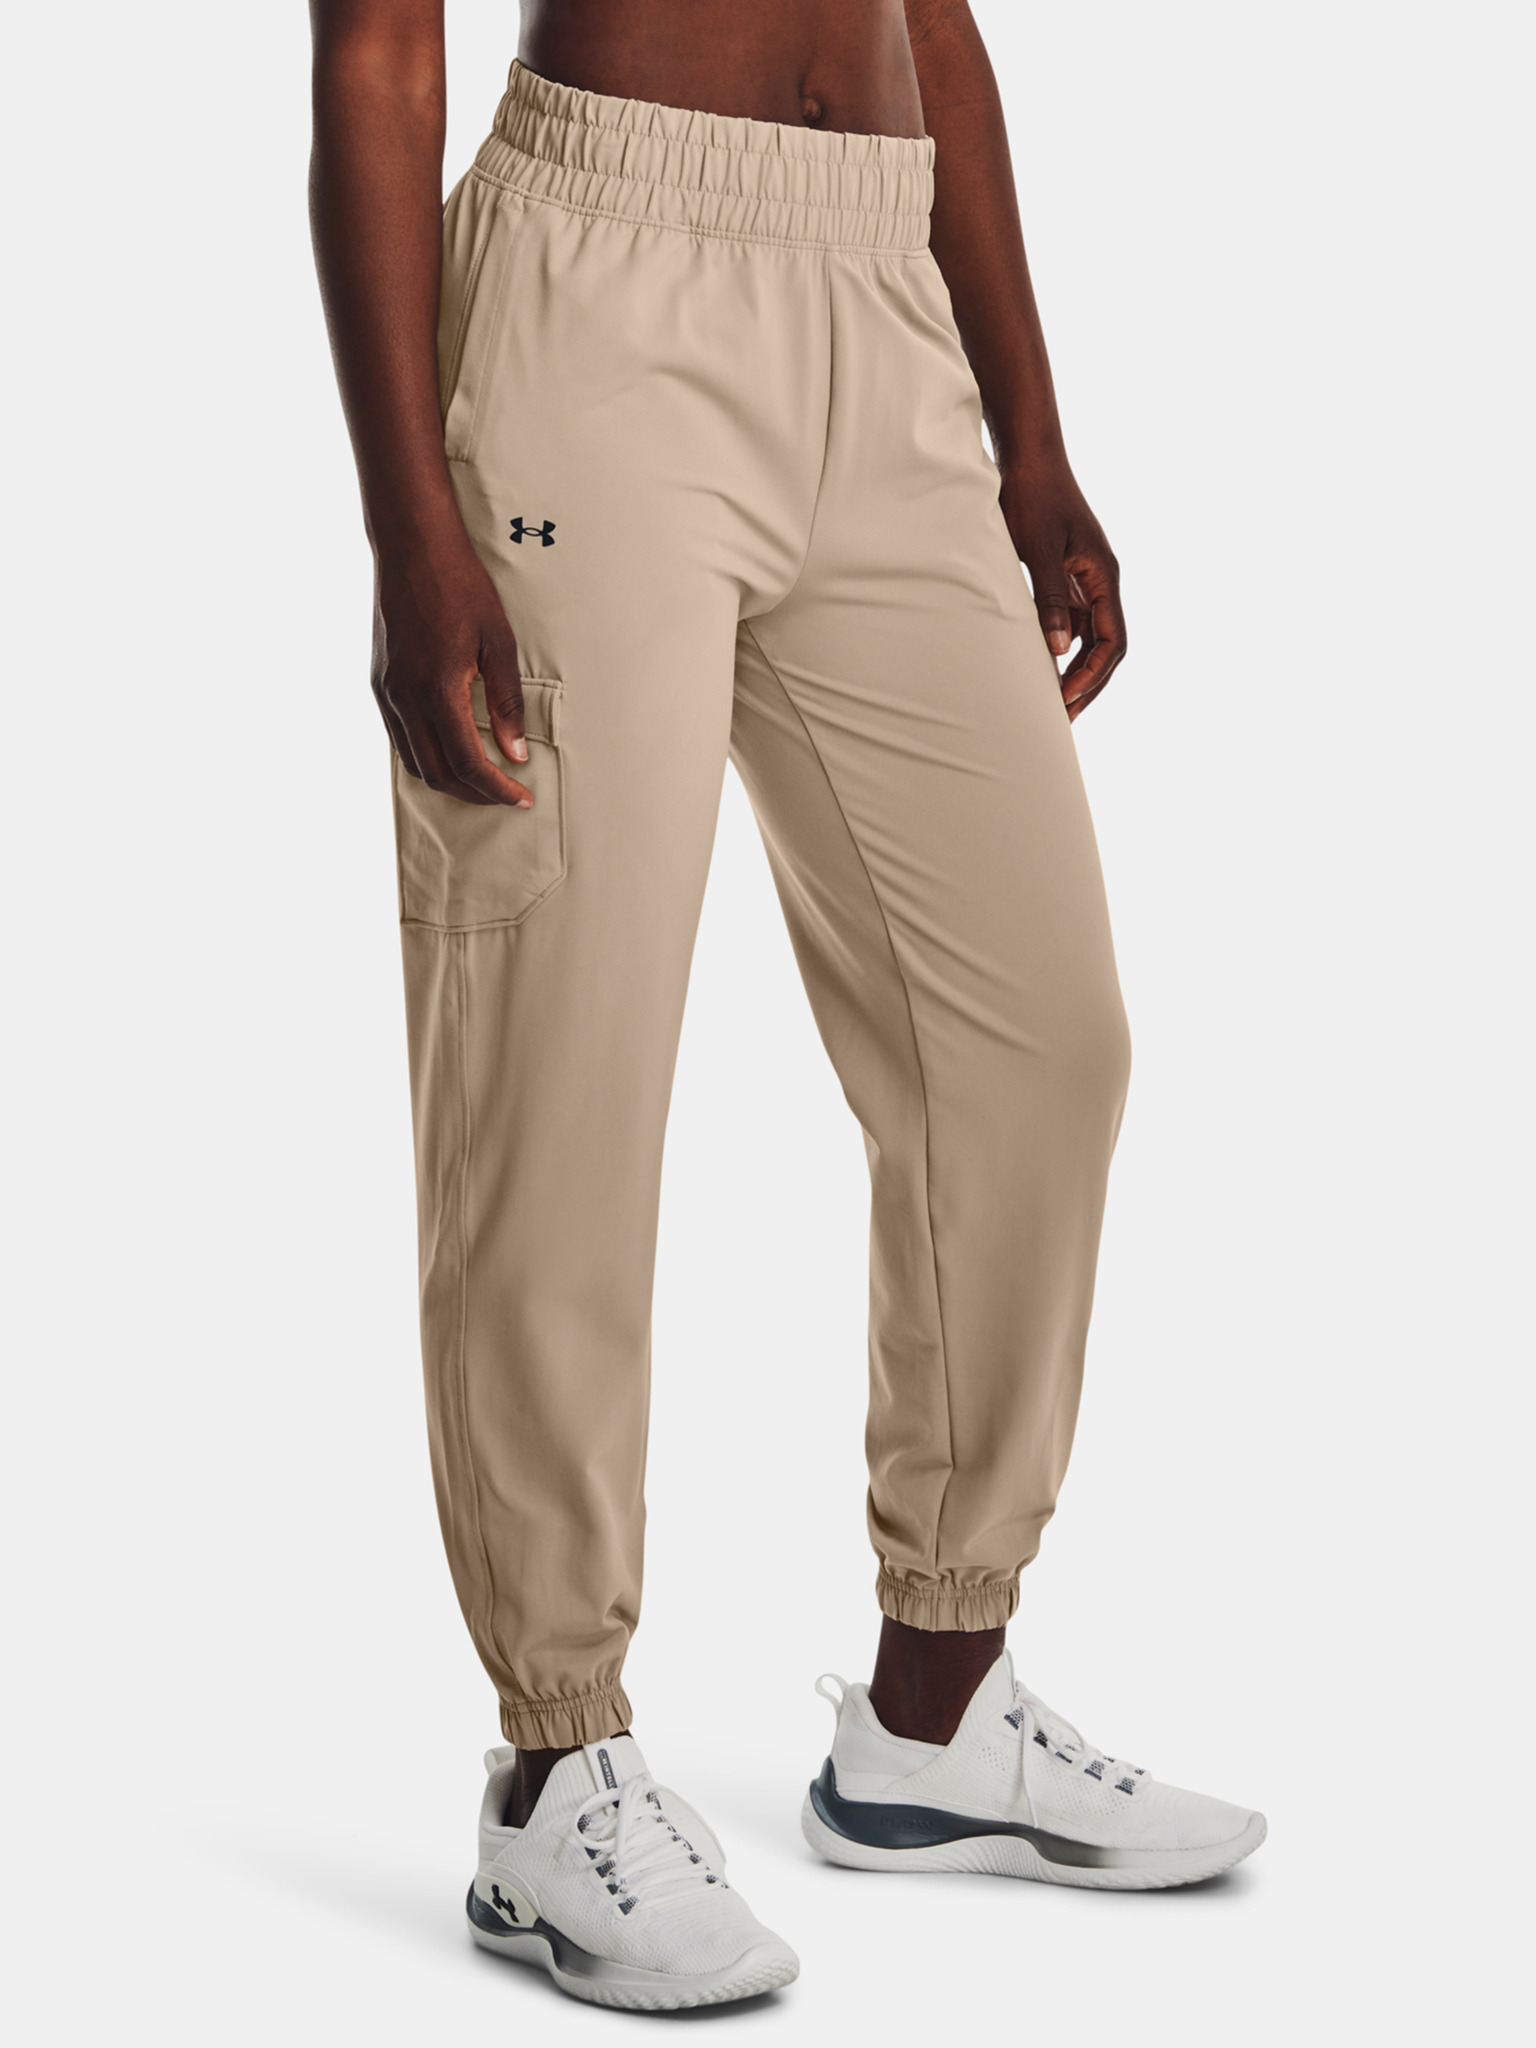 Under Armour Track pants and jogging bottoms for Women